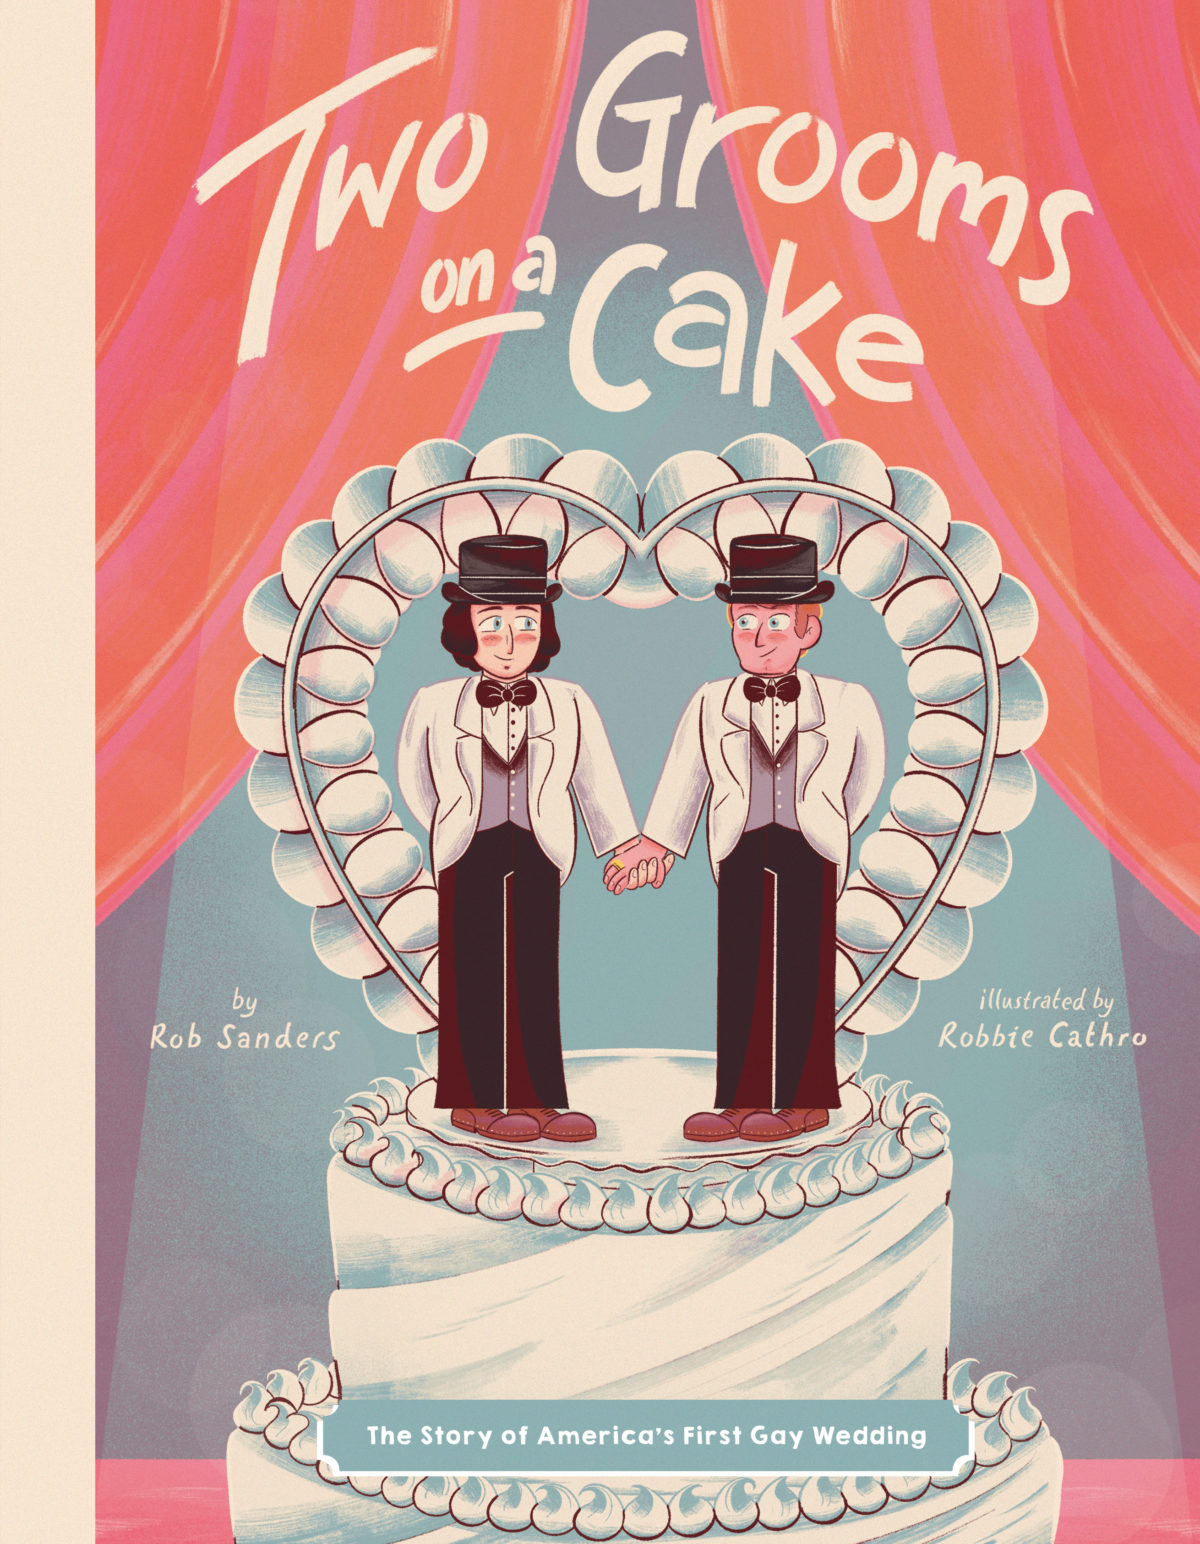 Two Grooms on a Cake: The Story of America’s First Gay Wedding